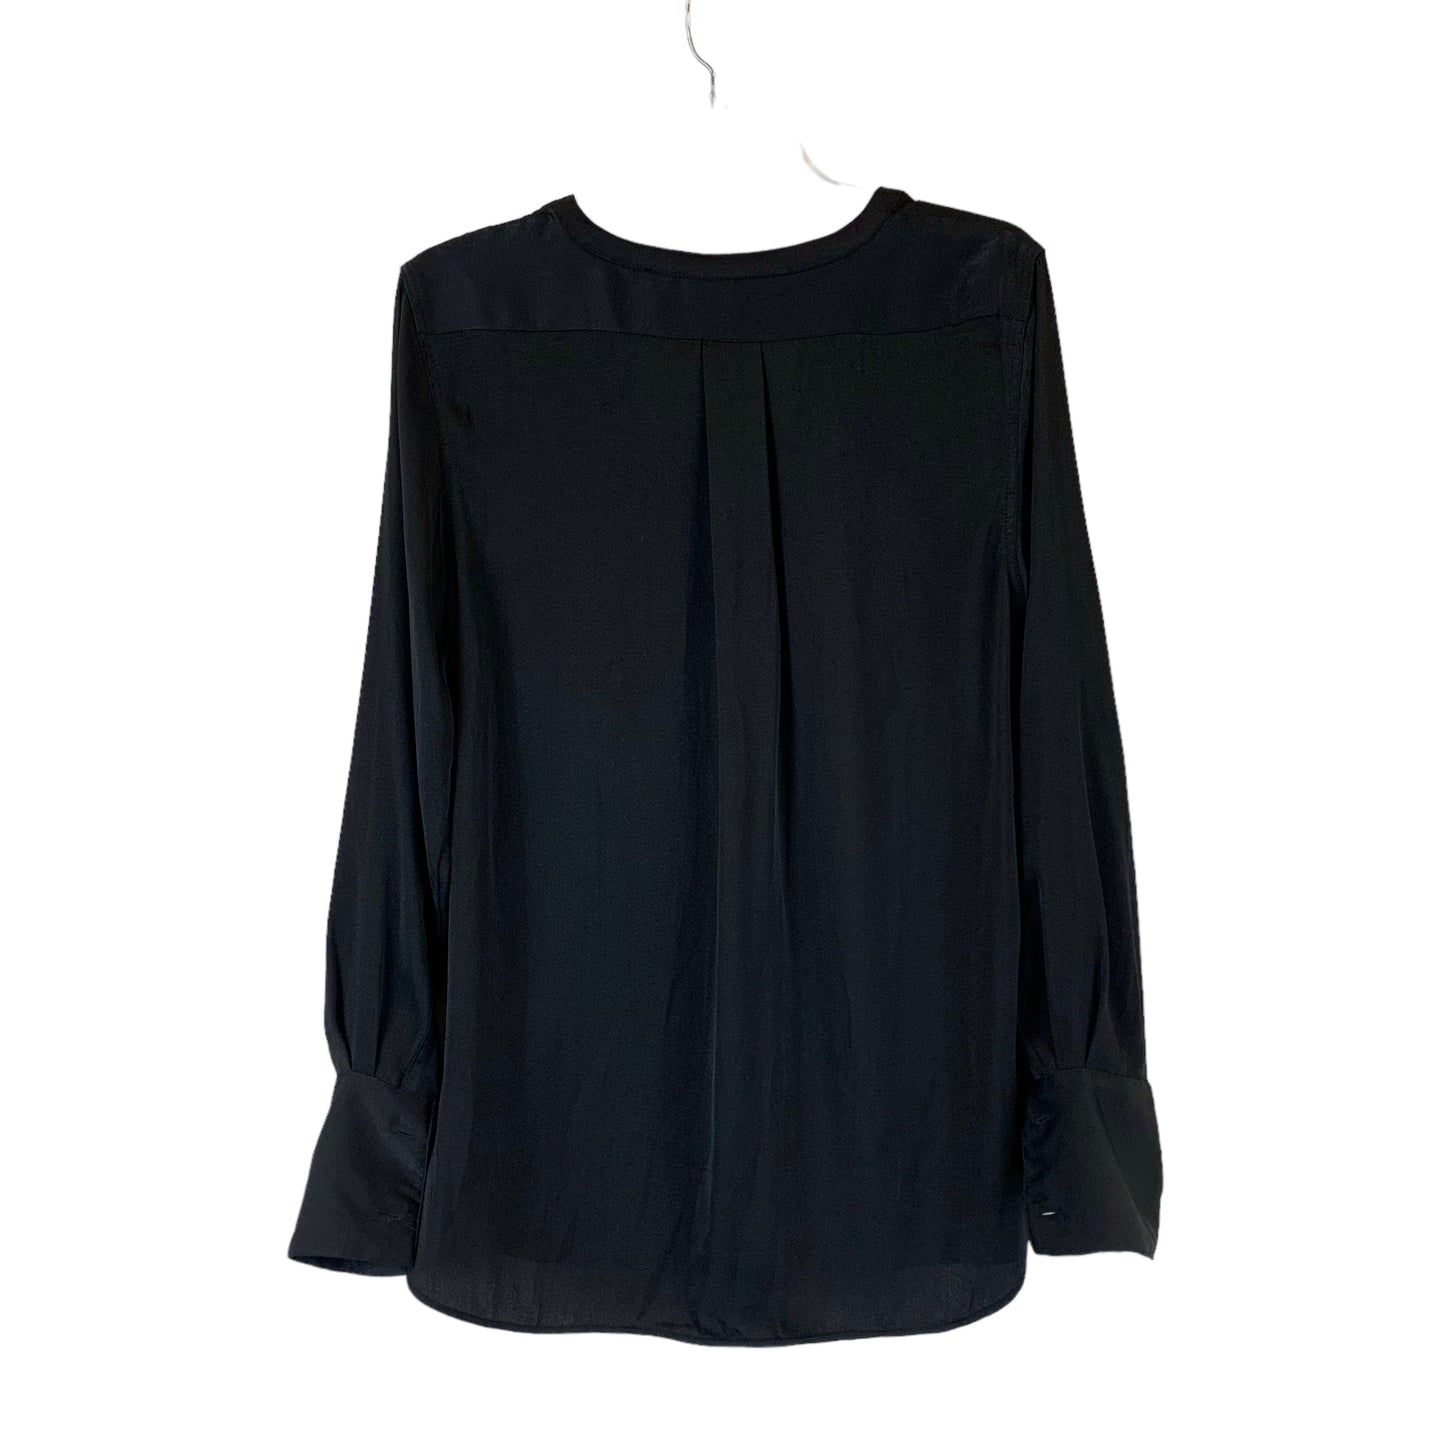 Blouse Long Sleeve By Adrienne Vittadini  Size: M